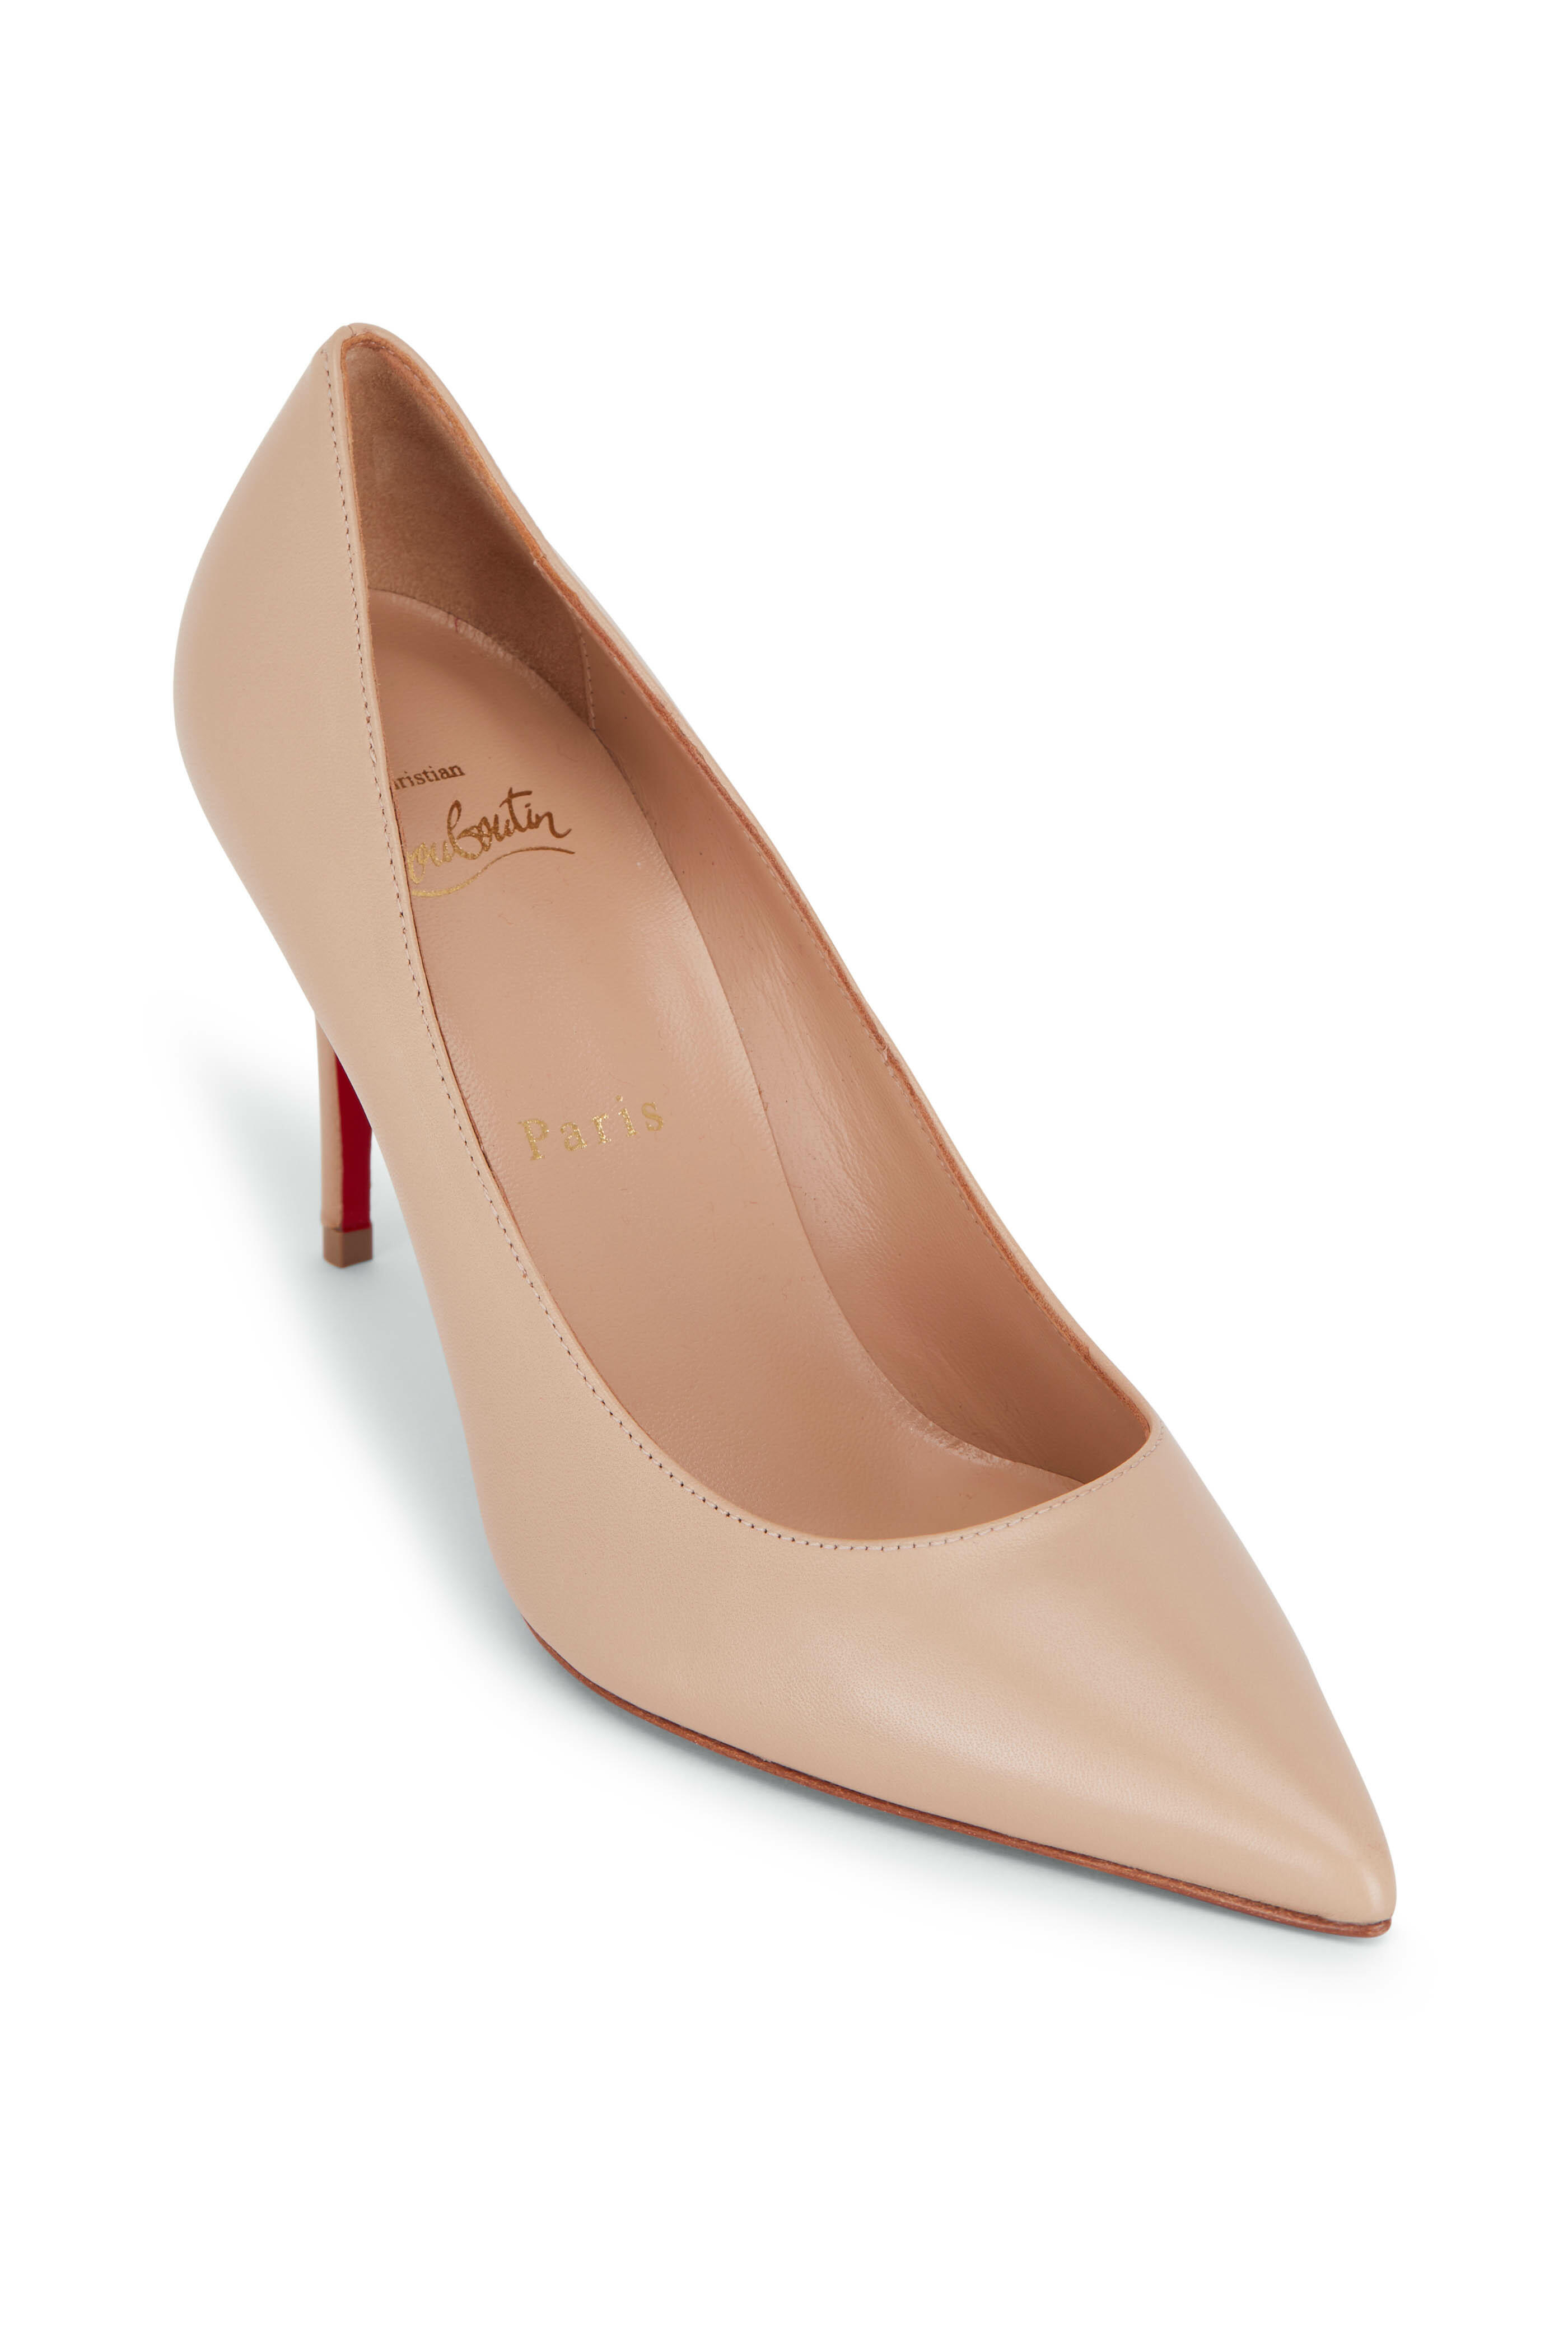 Christian Louboutin - Kate Leather Pump, 85mm | Mitchell Stores